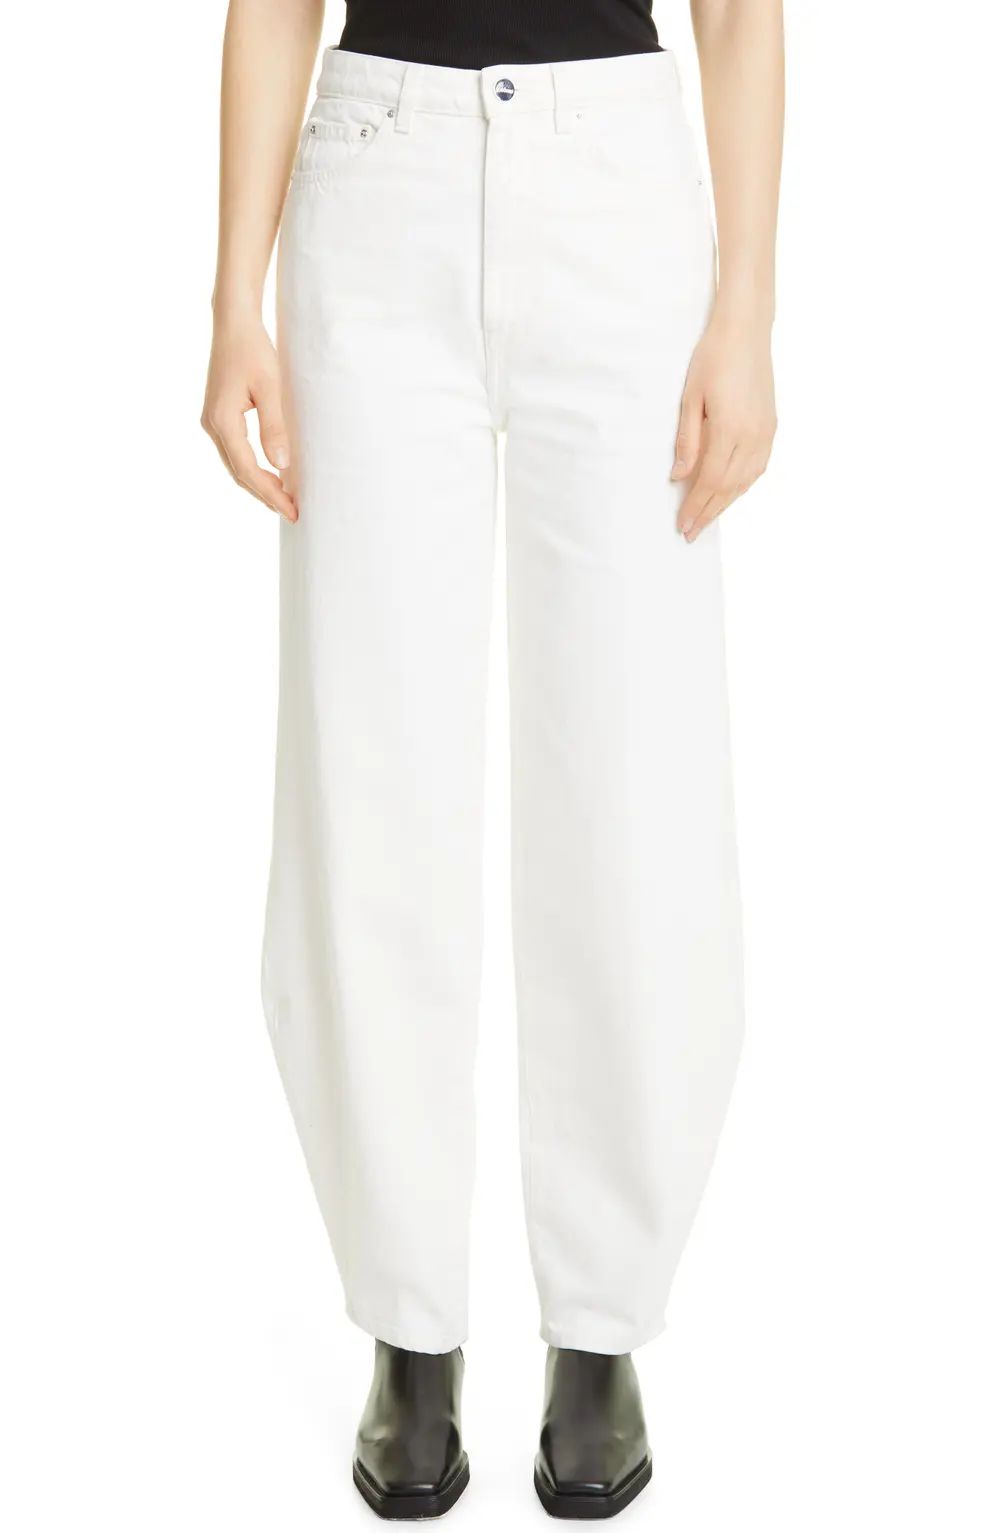 Toteme High Waist Barrel Leg Jeans, Size 28 X 30 in Off-White at Nordstrom | Nordstrom Canada